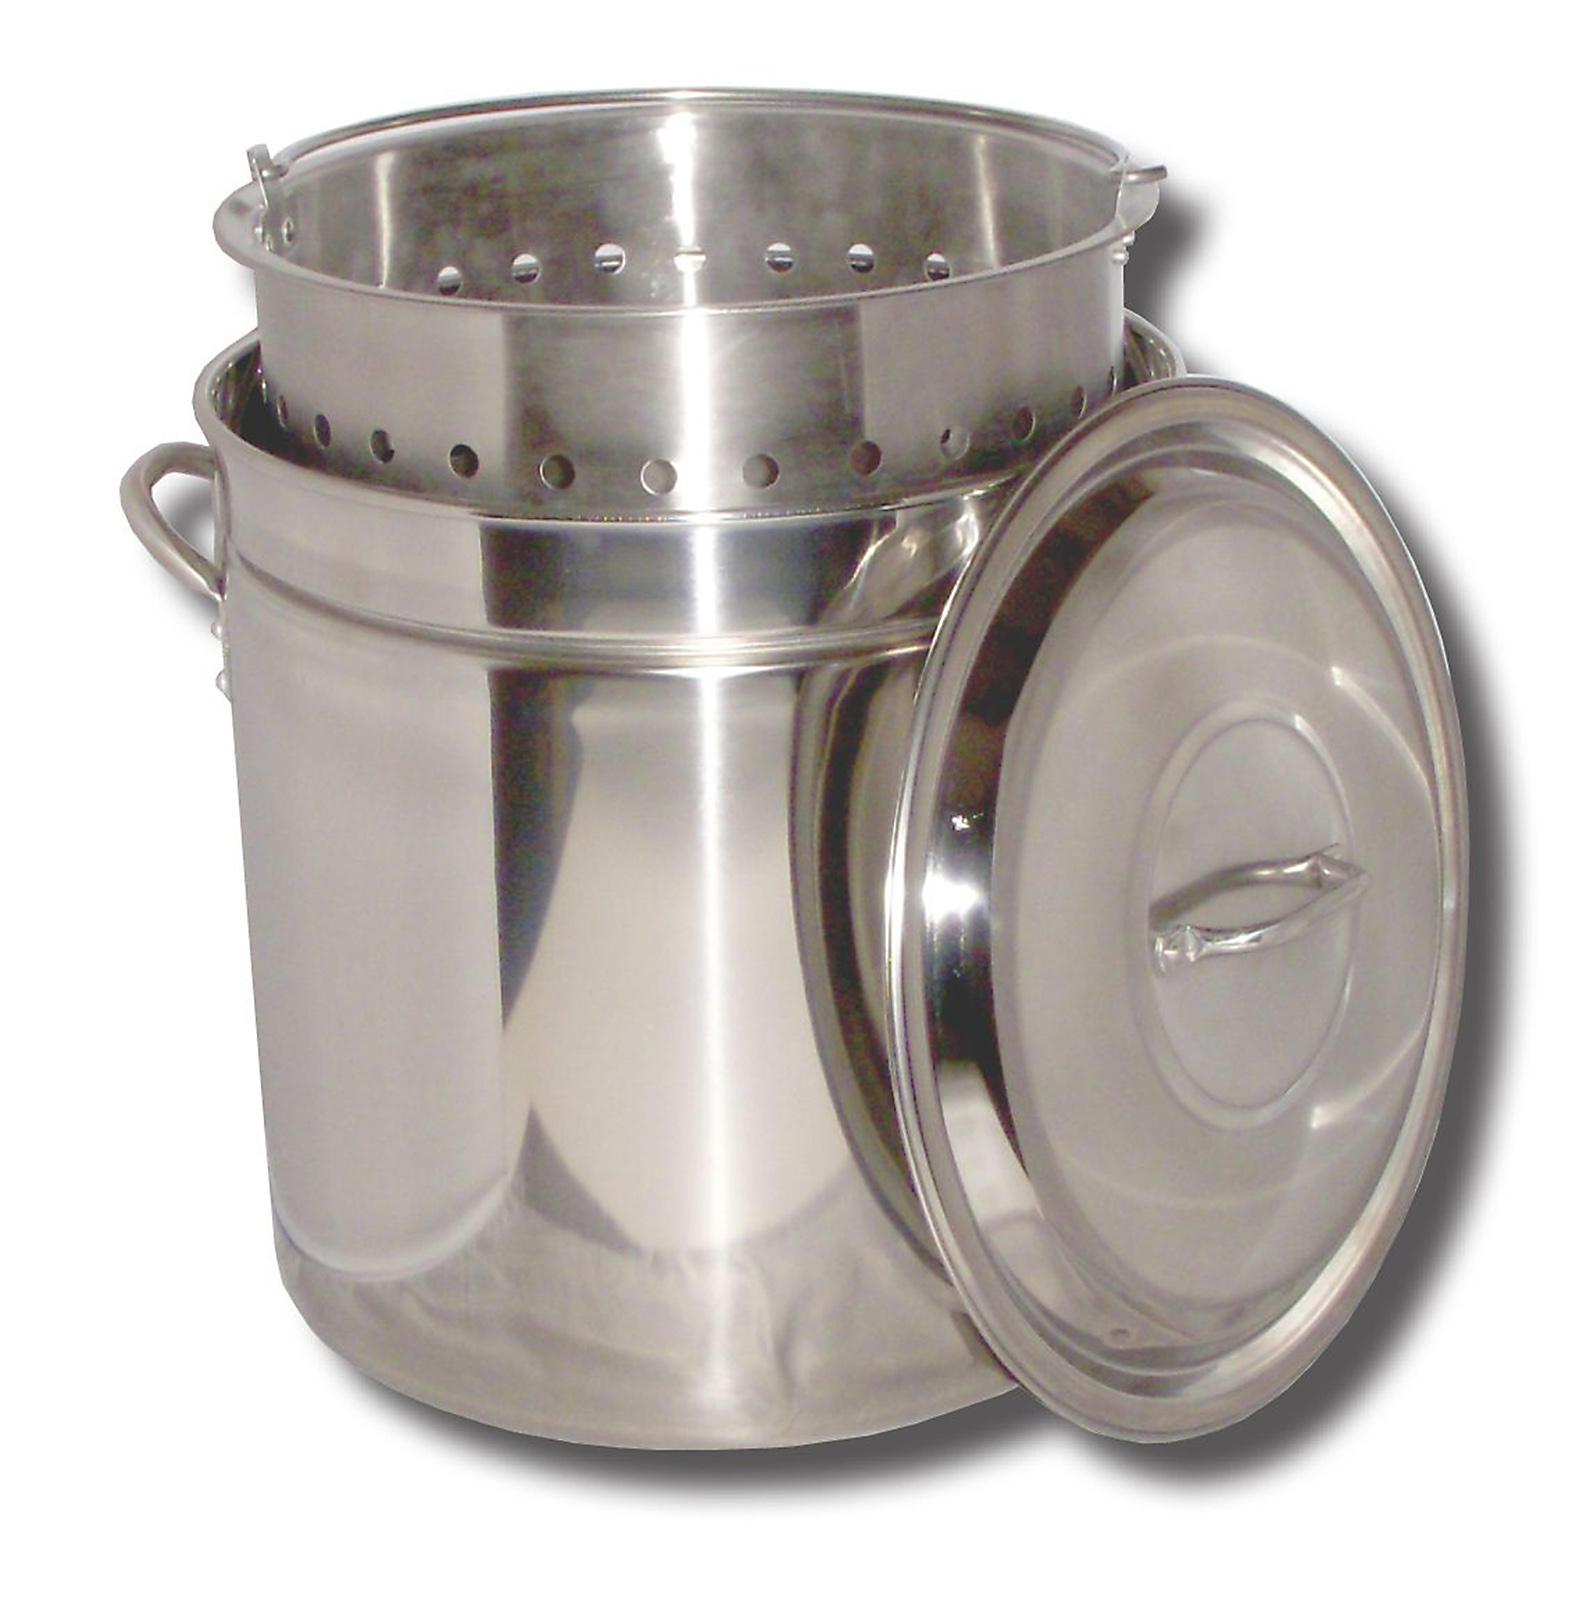 King Kooker&reg; 62 Qt. Stainless Steel Boiling Pot with Steam Ridge. Great for Boiling and Steaming!